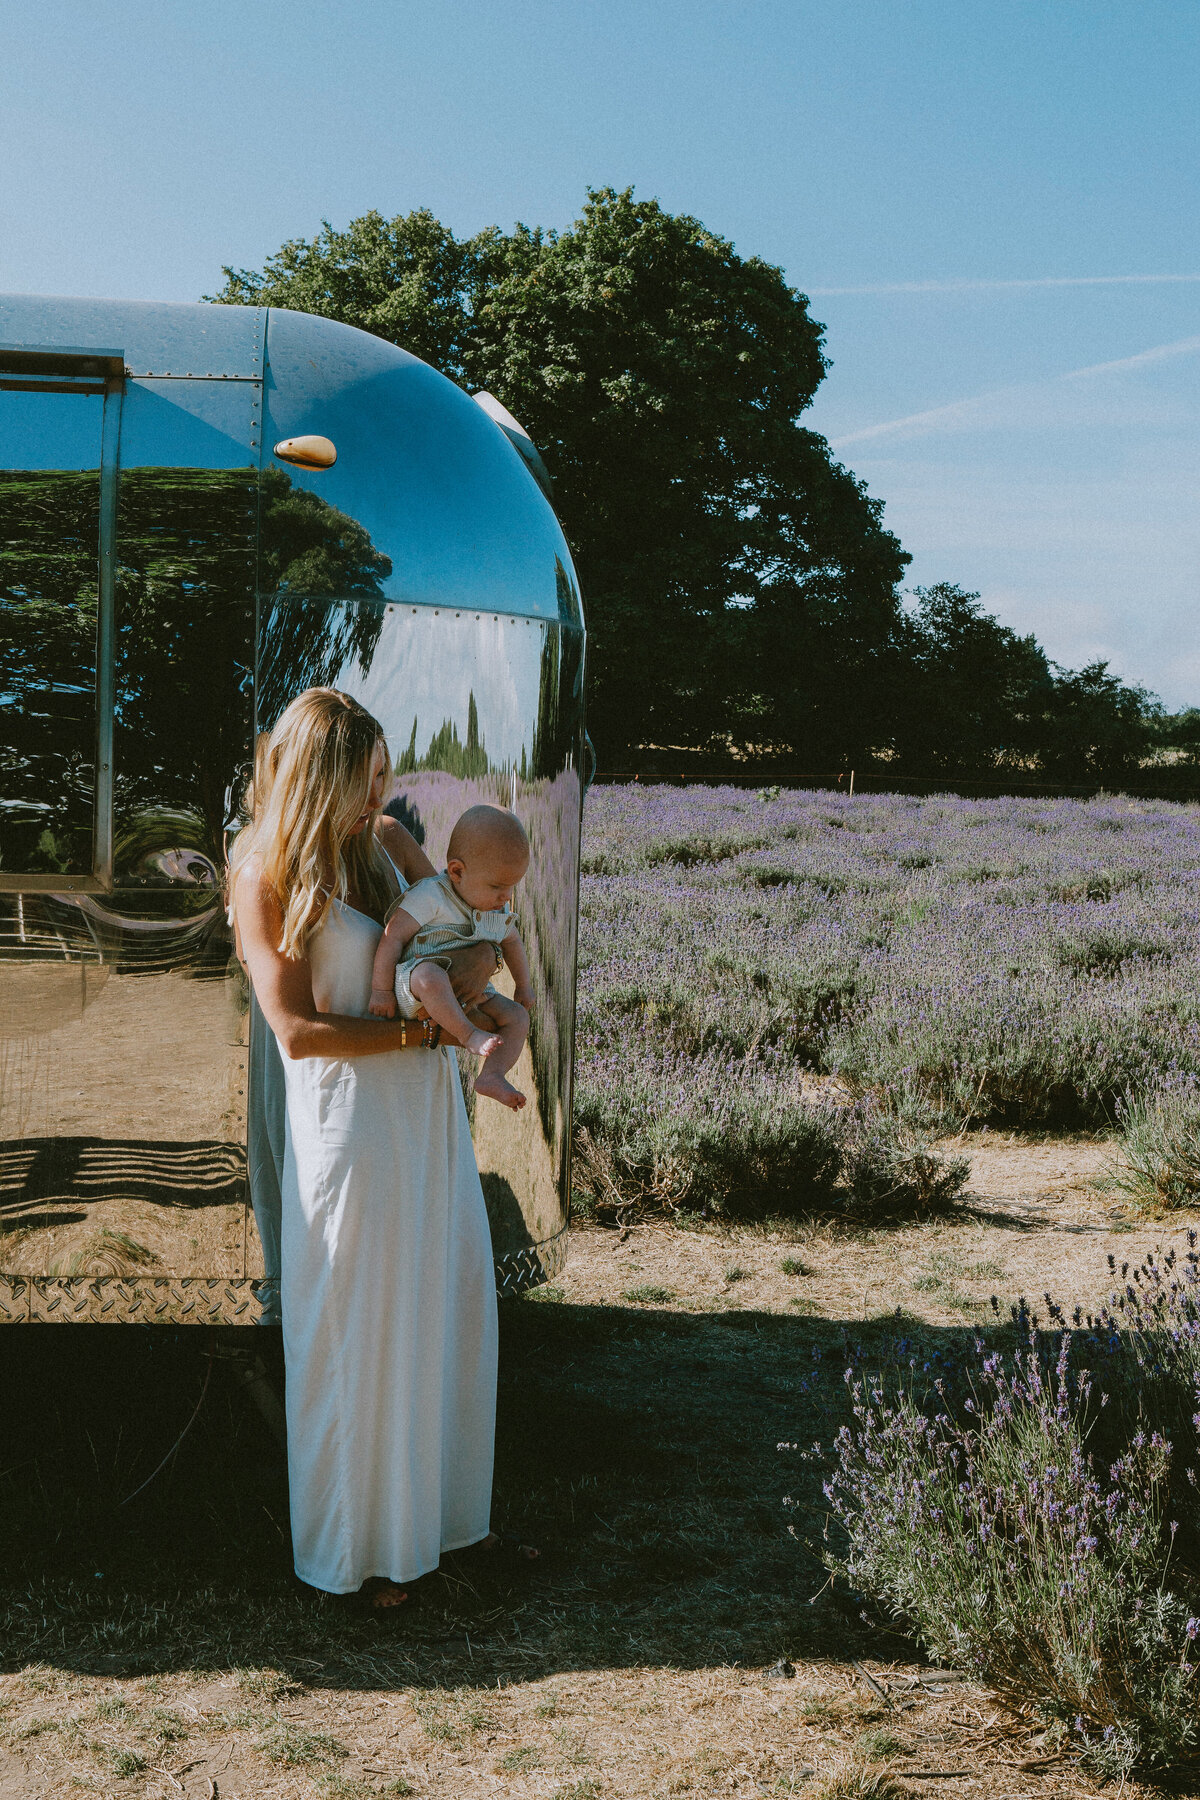 The beautiful sights of Bansted Lavender fields make the perfect backdrop for family photos